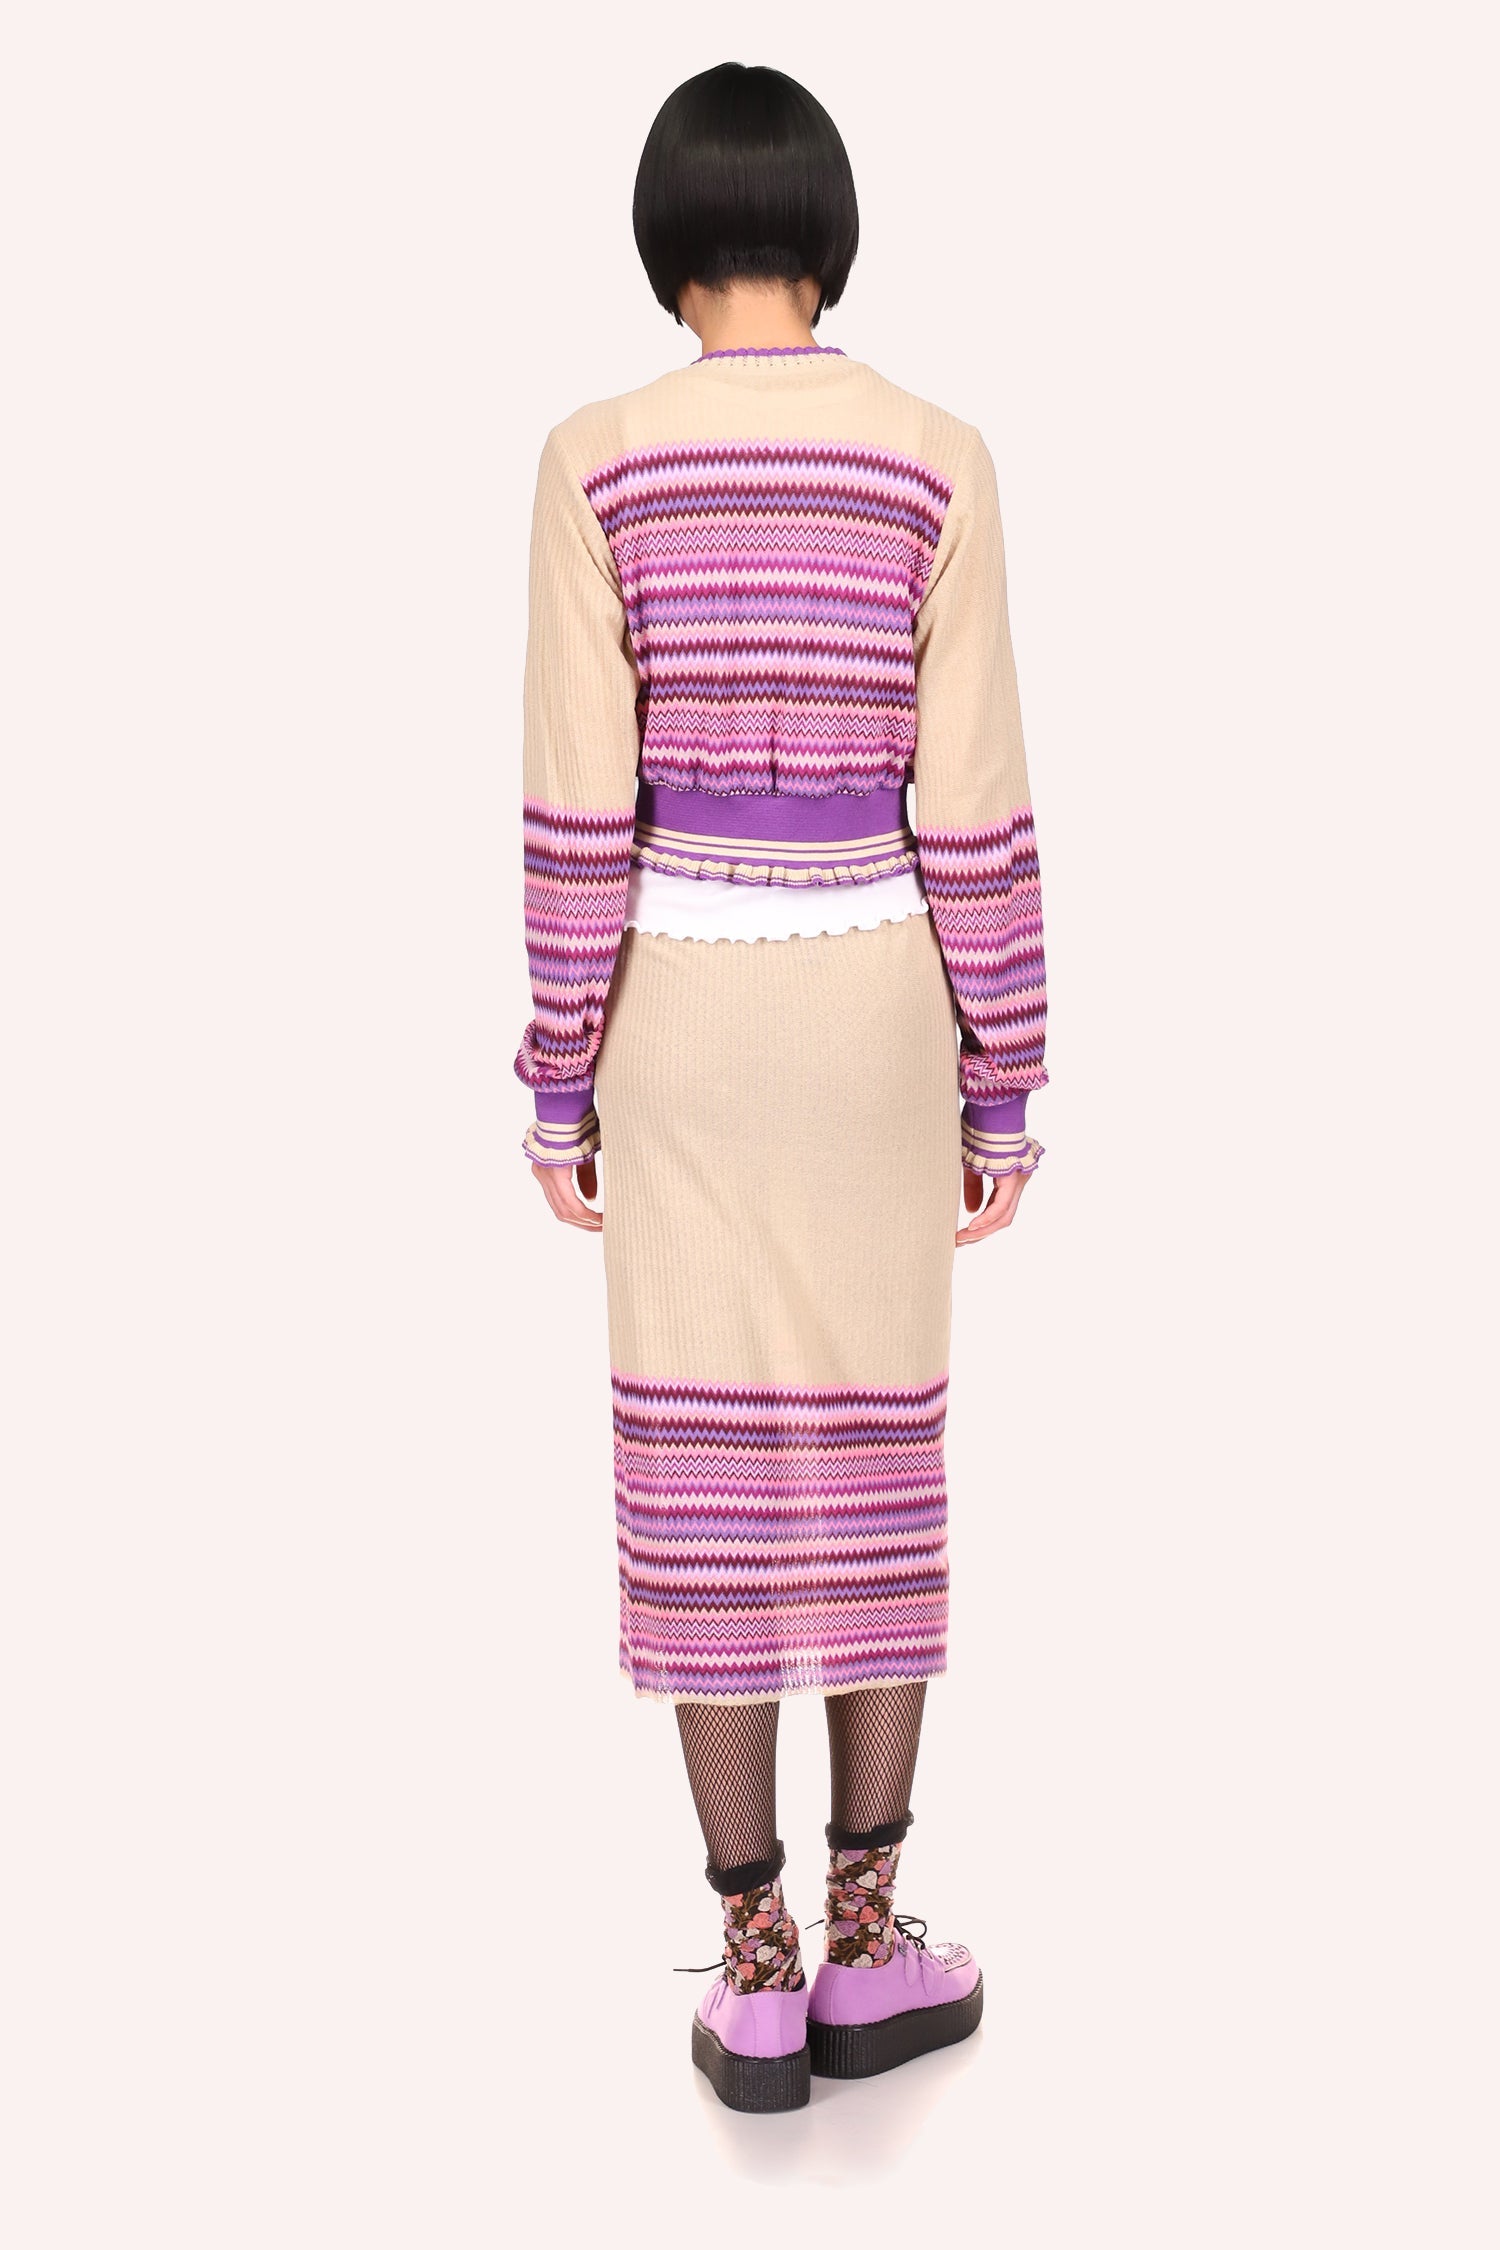 Tonal Zigzag Skirt lavender, the skirt highlights the curves of your body